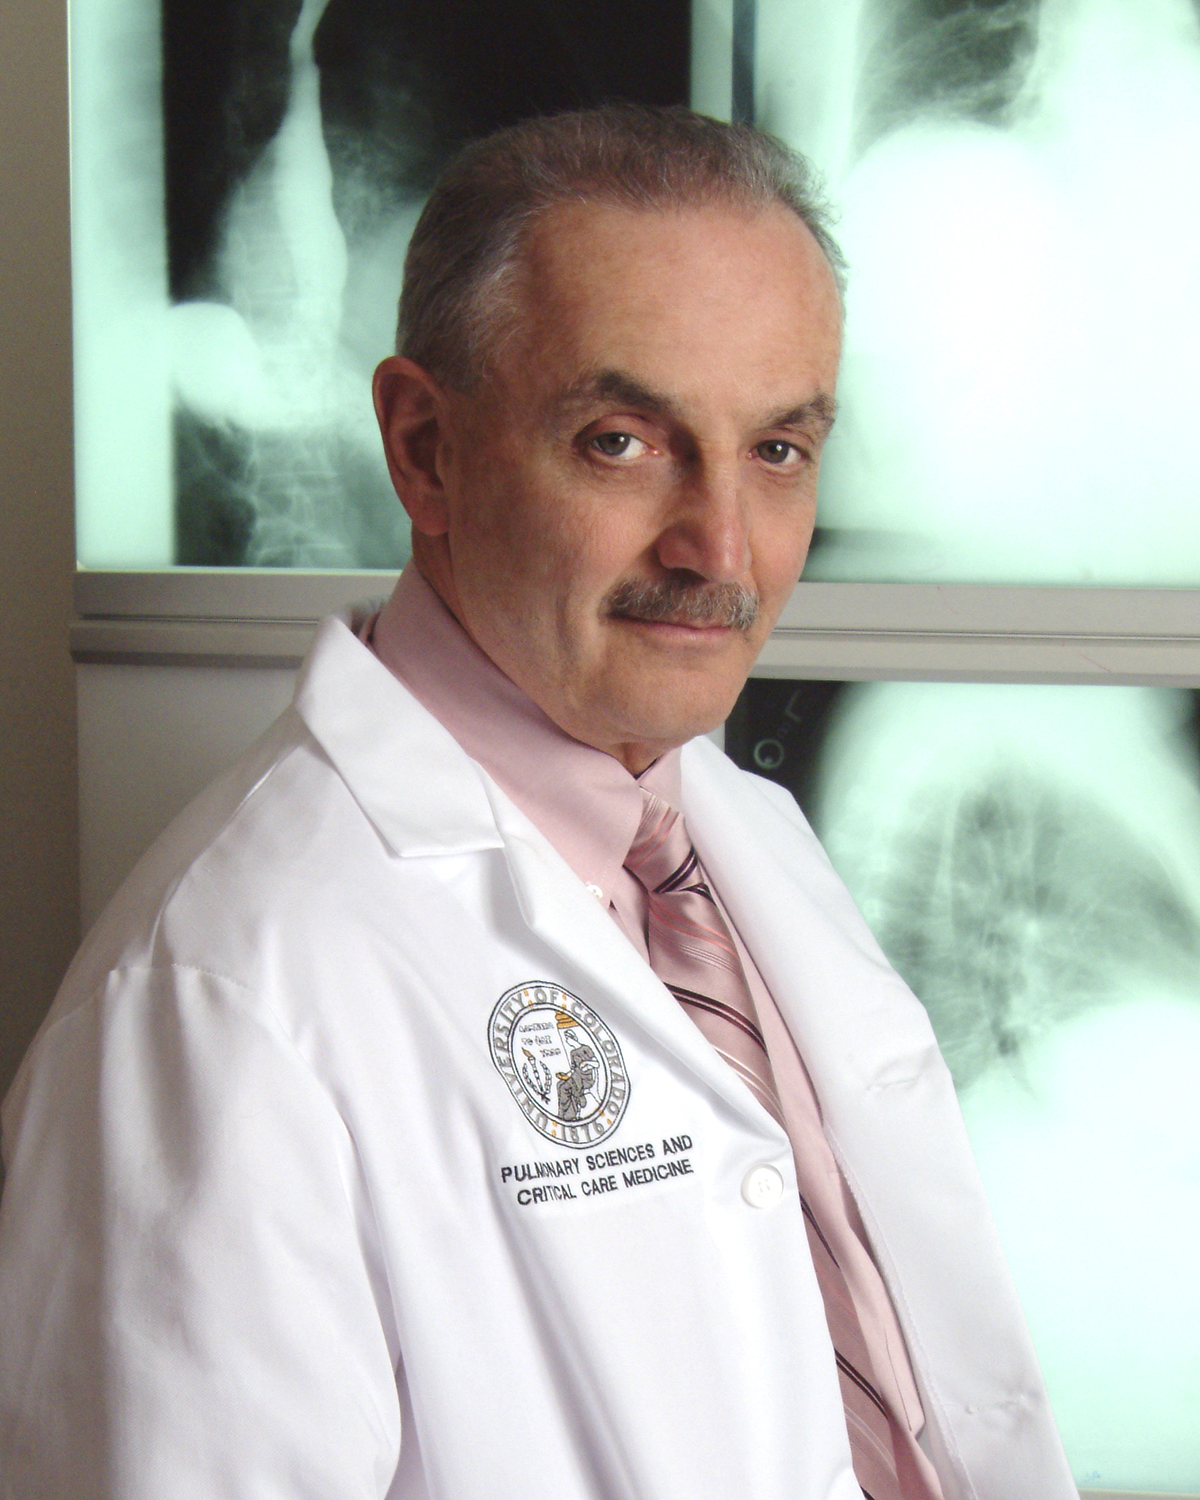 Dr. Marvin Schwarz leading researcher of Pulmonary Fibrosis